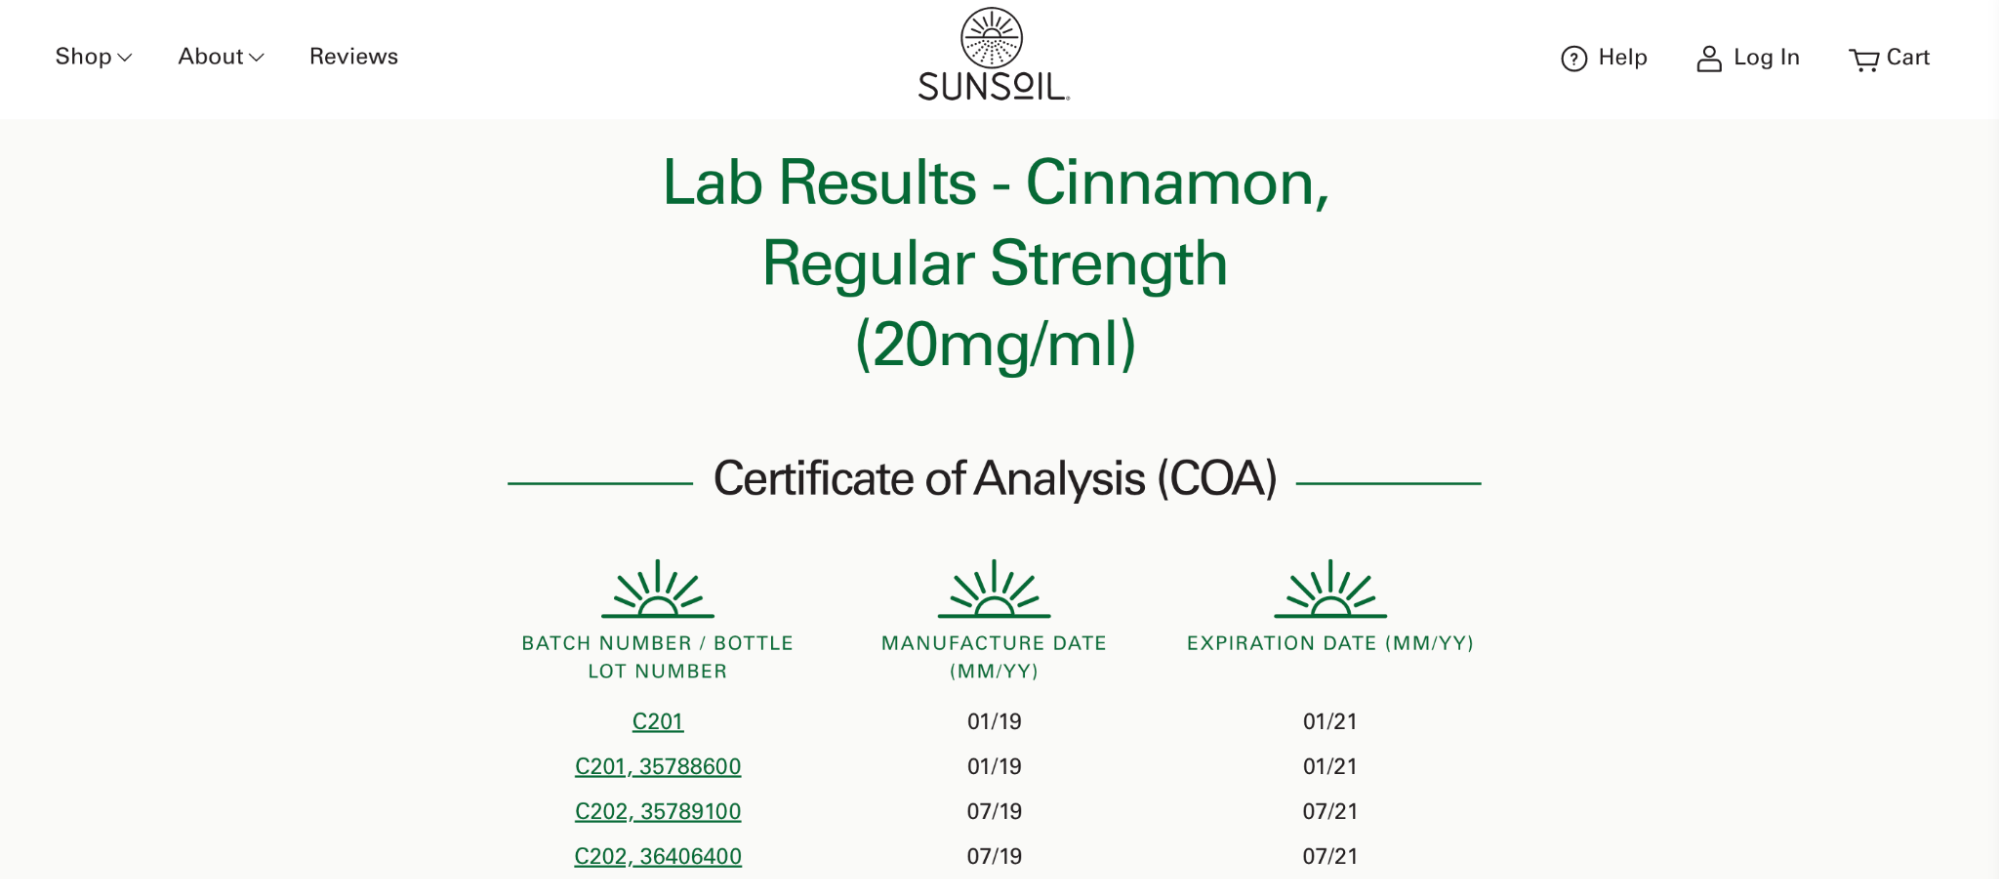 A lab results certificate of analysis showing CBD content in a Sunsoil regular strength cinnamon product